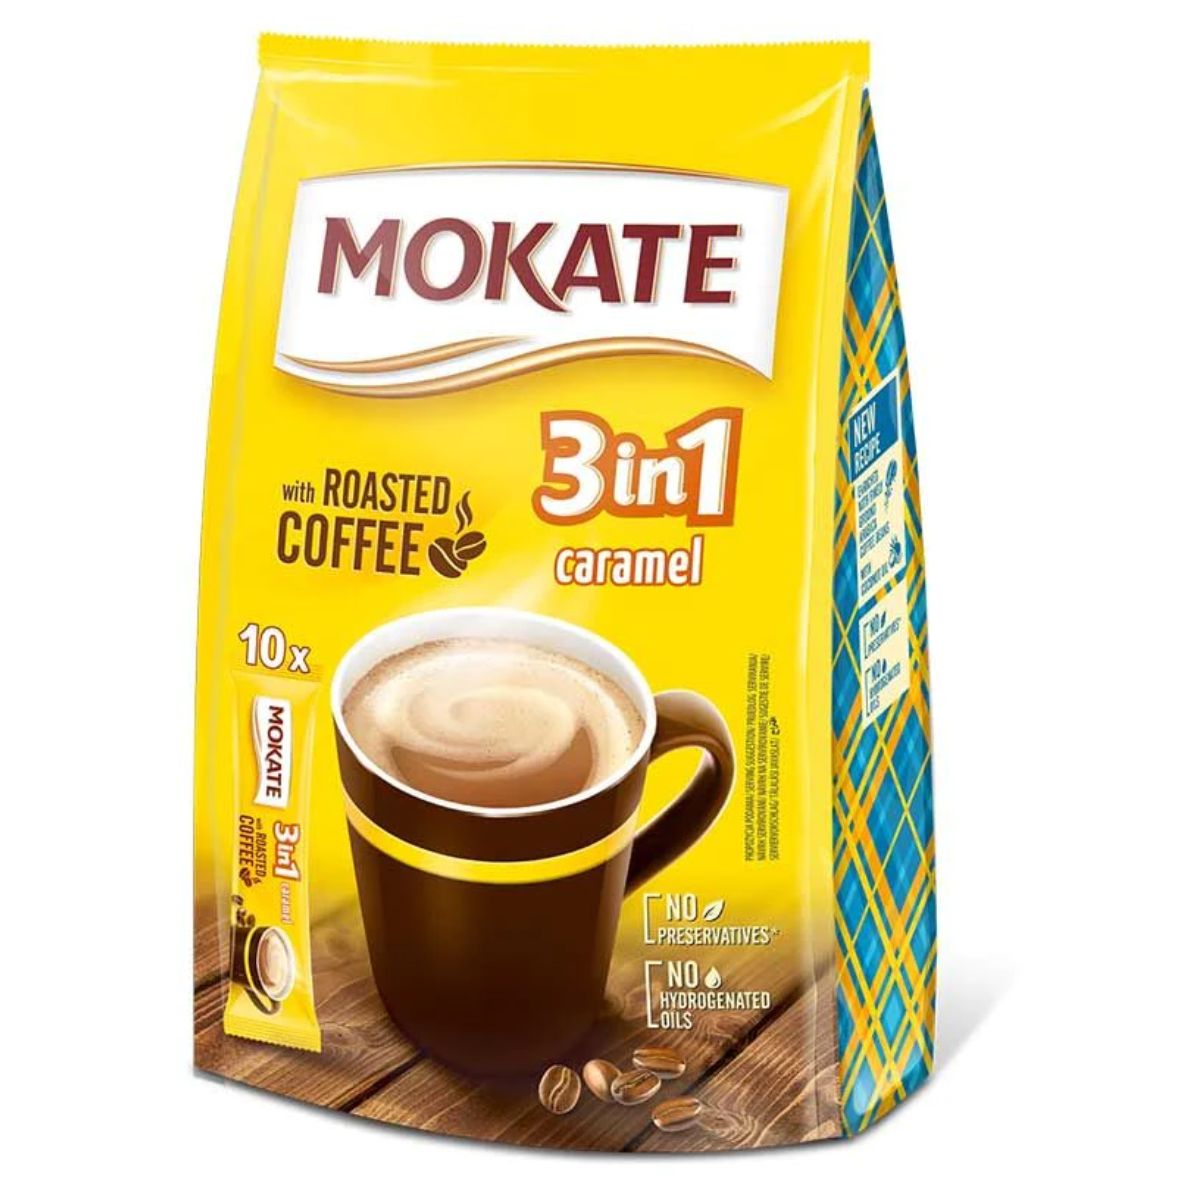 A package of Mokate - 3 in 1 Roasted Coffee Caramel - 10pcs instant coffee mix with roasted coffee, displaying 10 sachets and no preservatives or hydrogenated oils.